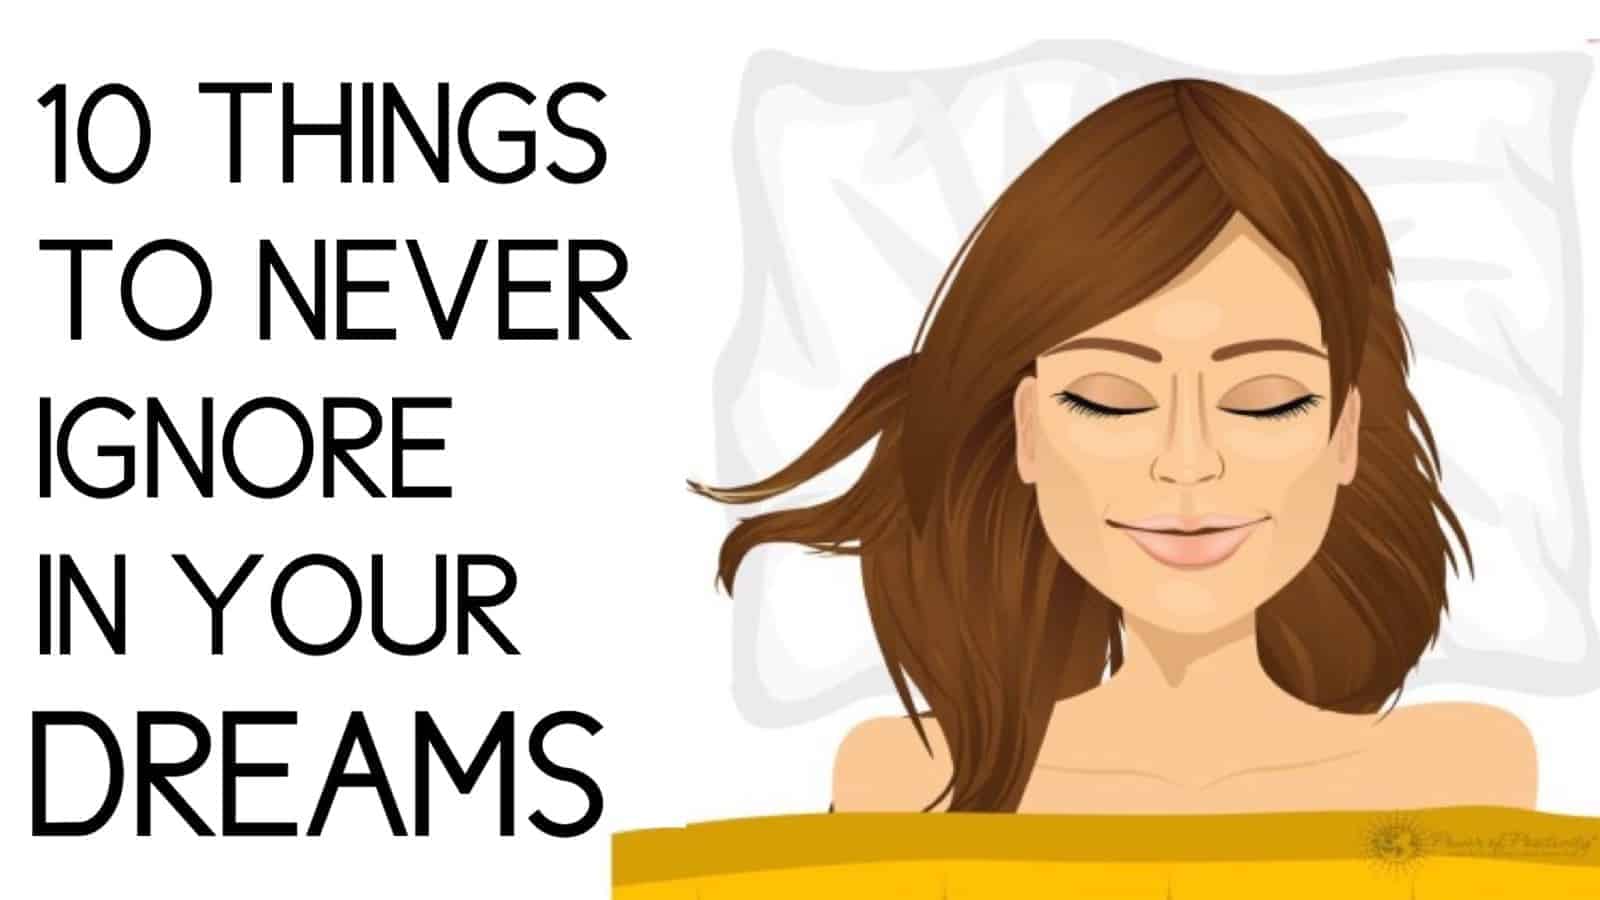 10 Things To Never Ignore In Your Dreams